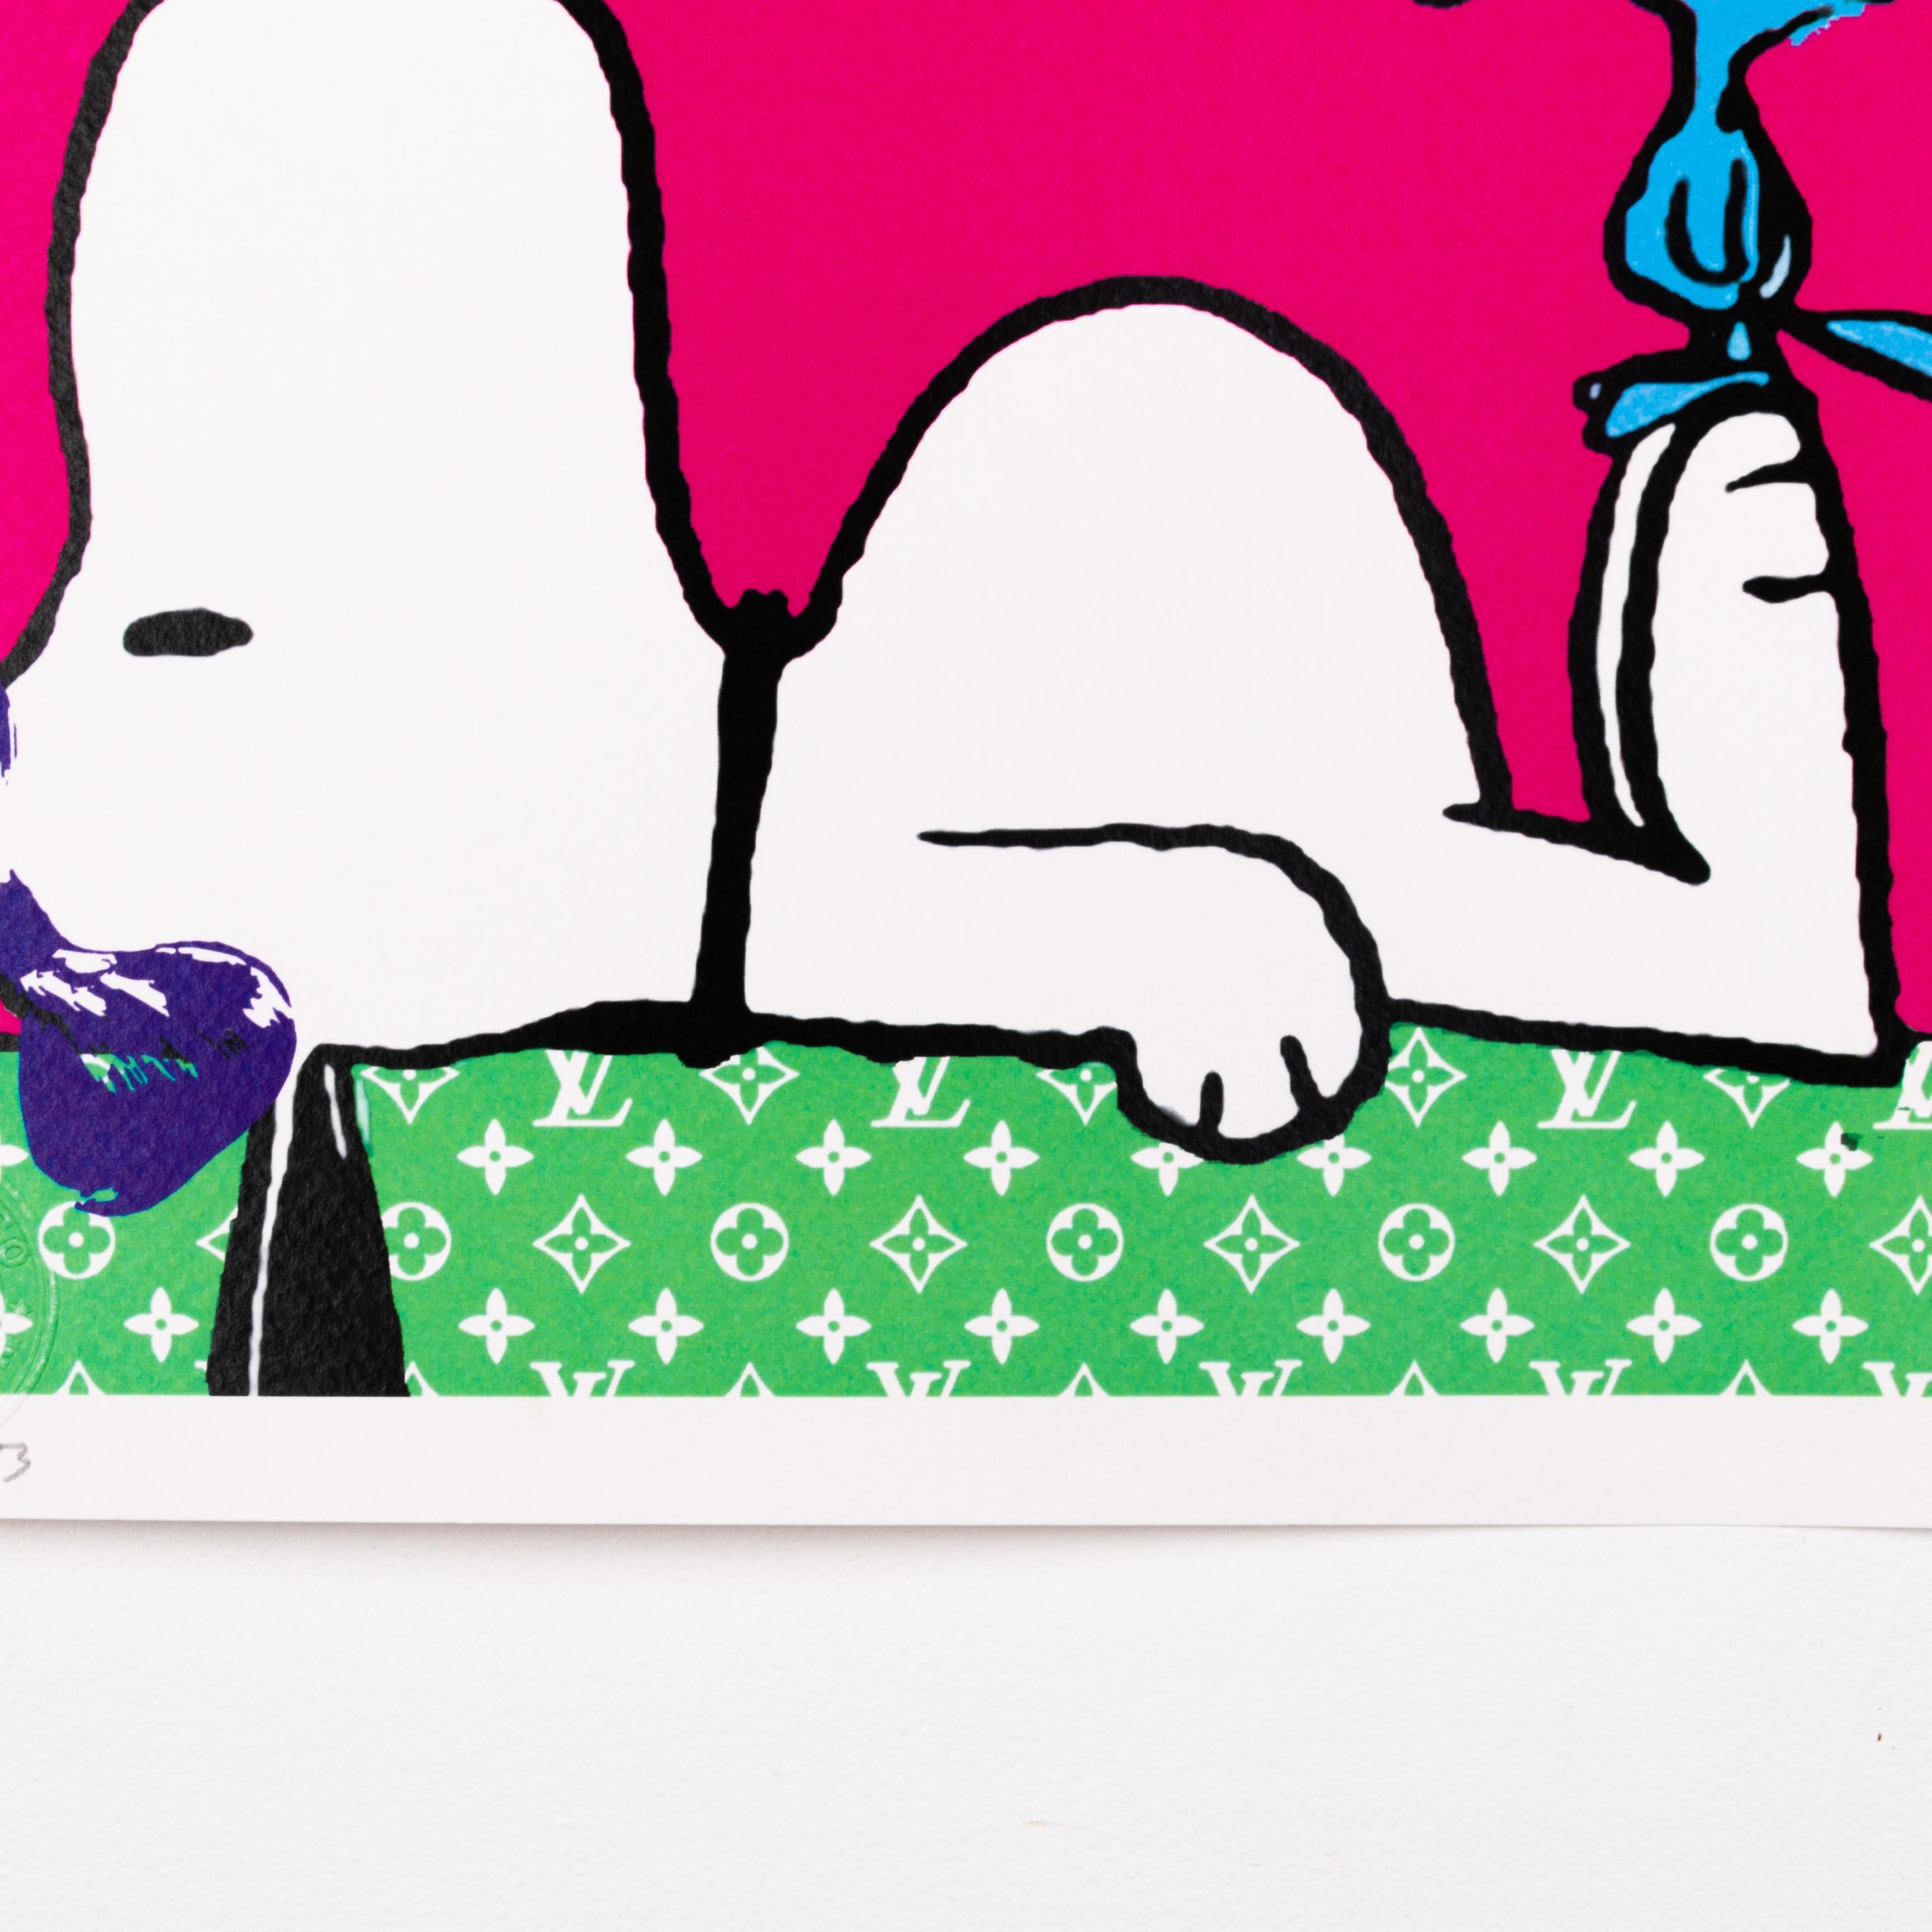 Death NYC Signed Limited Ed Pop Art Print Snoopy Vuitton 
From a private English collection
Free international shipping

